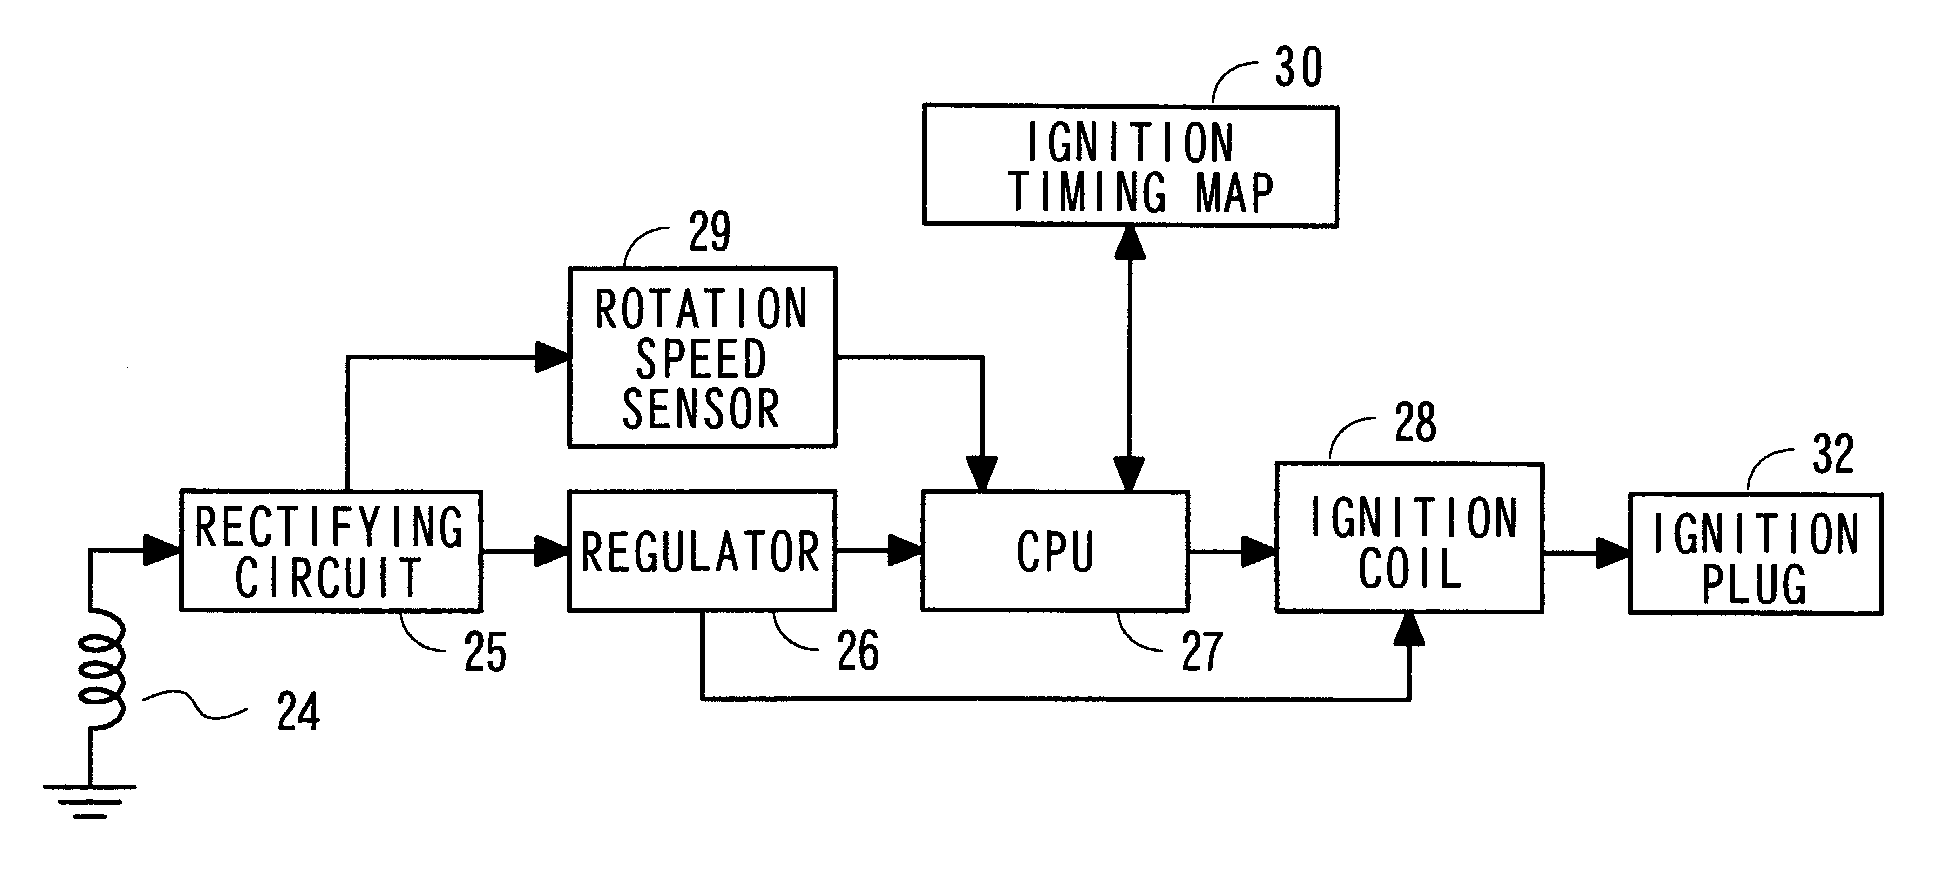 Engine rotation speed controller for working machine